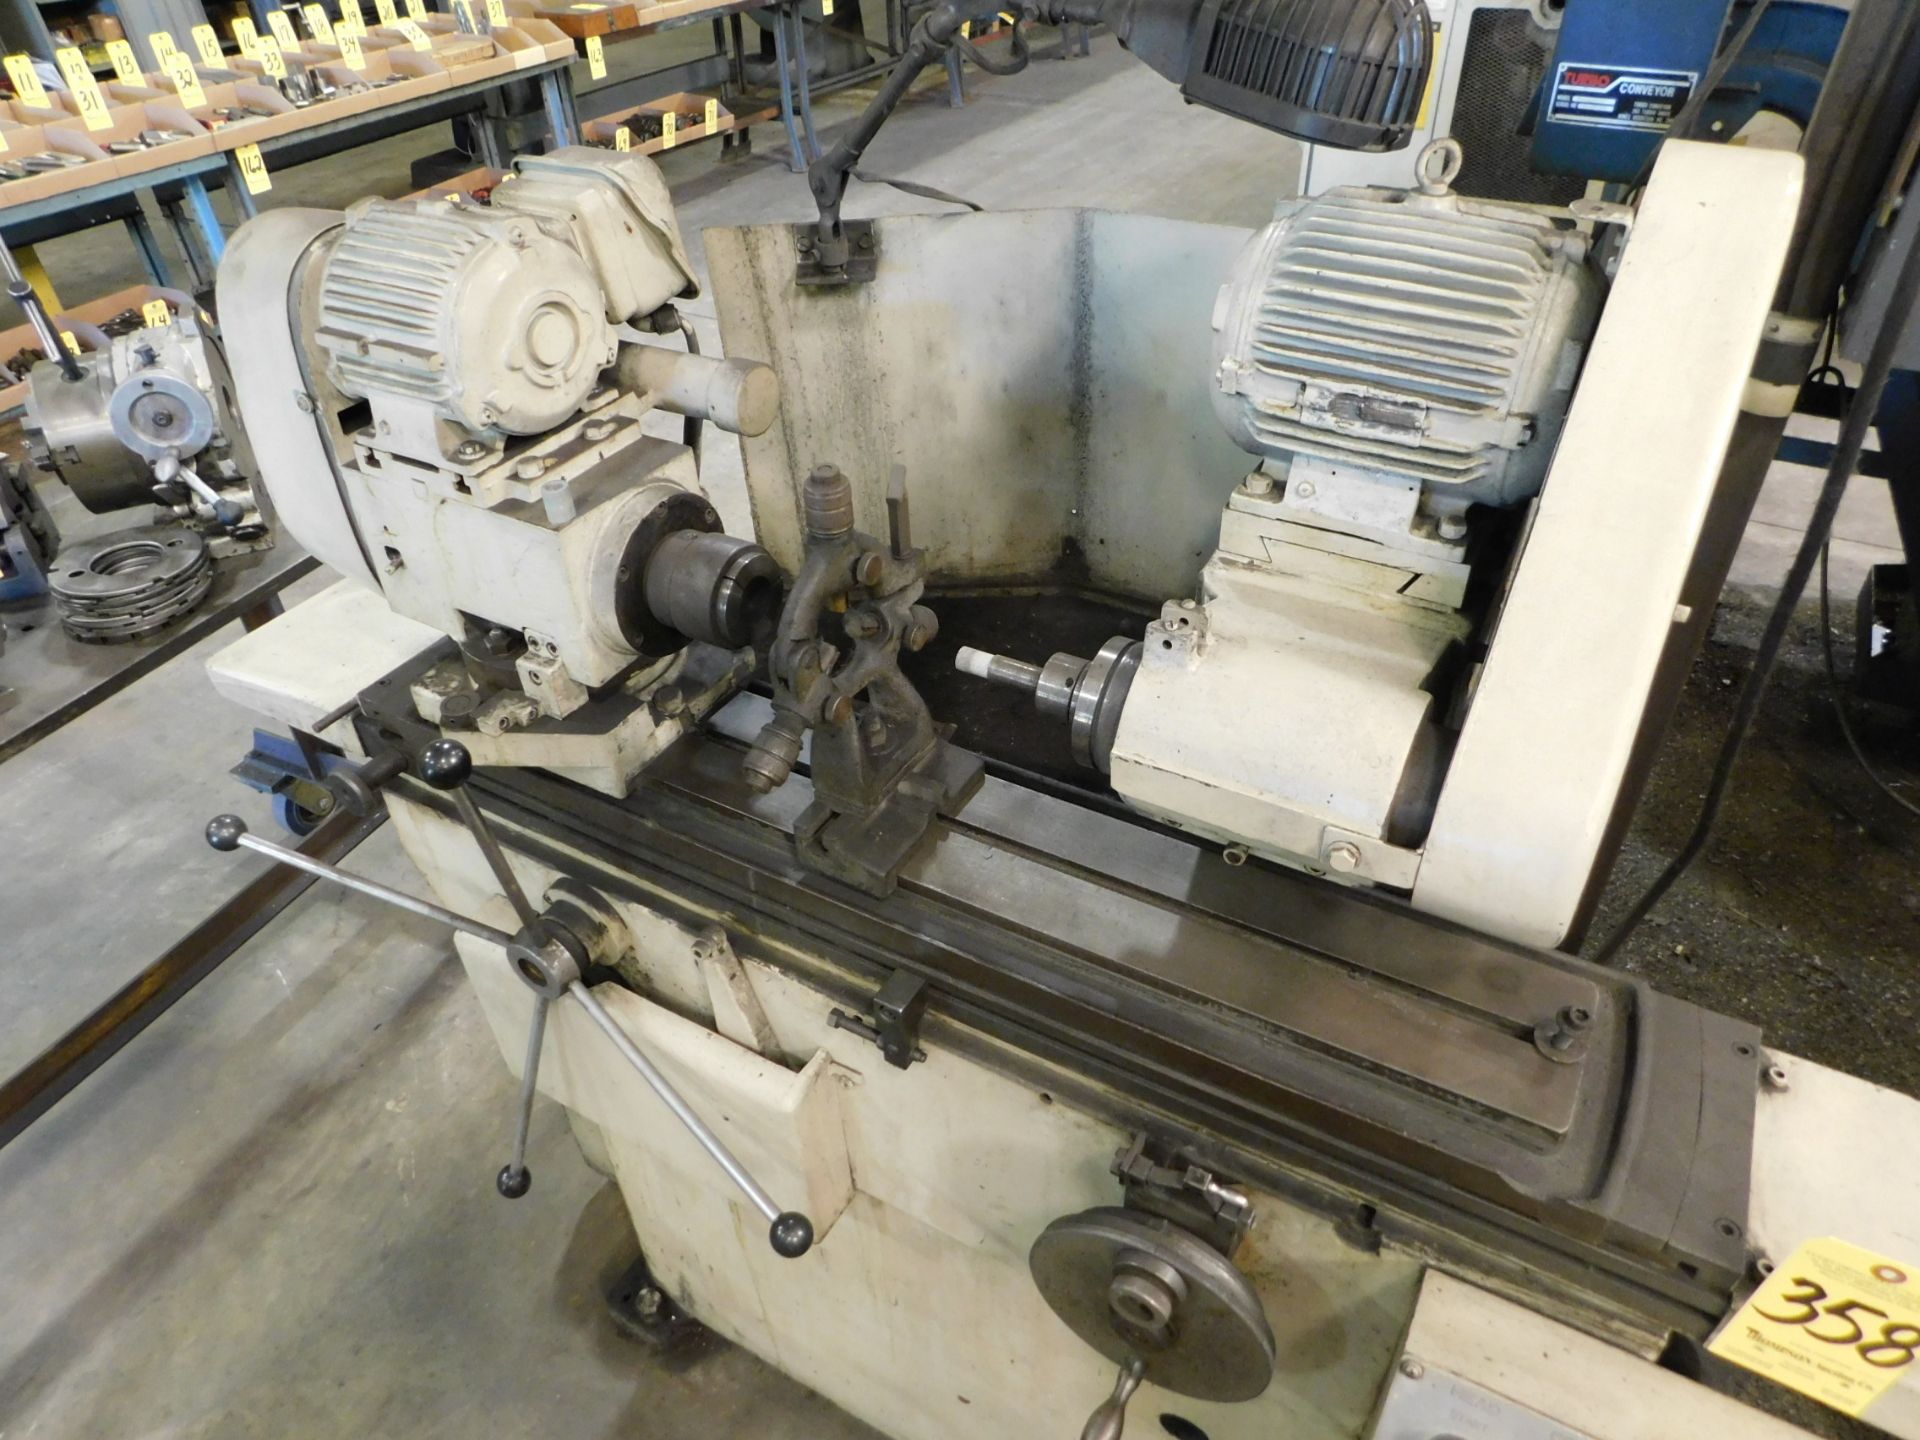 Fuji Tool Room Internal Grinder, 12 Inch Swing Capacity, Appears to be Parker Majestic Copy - Image 2 of 7